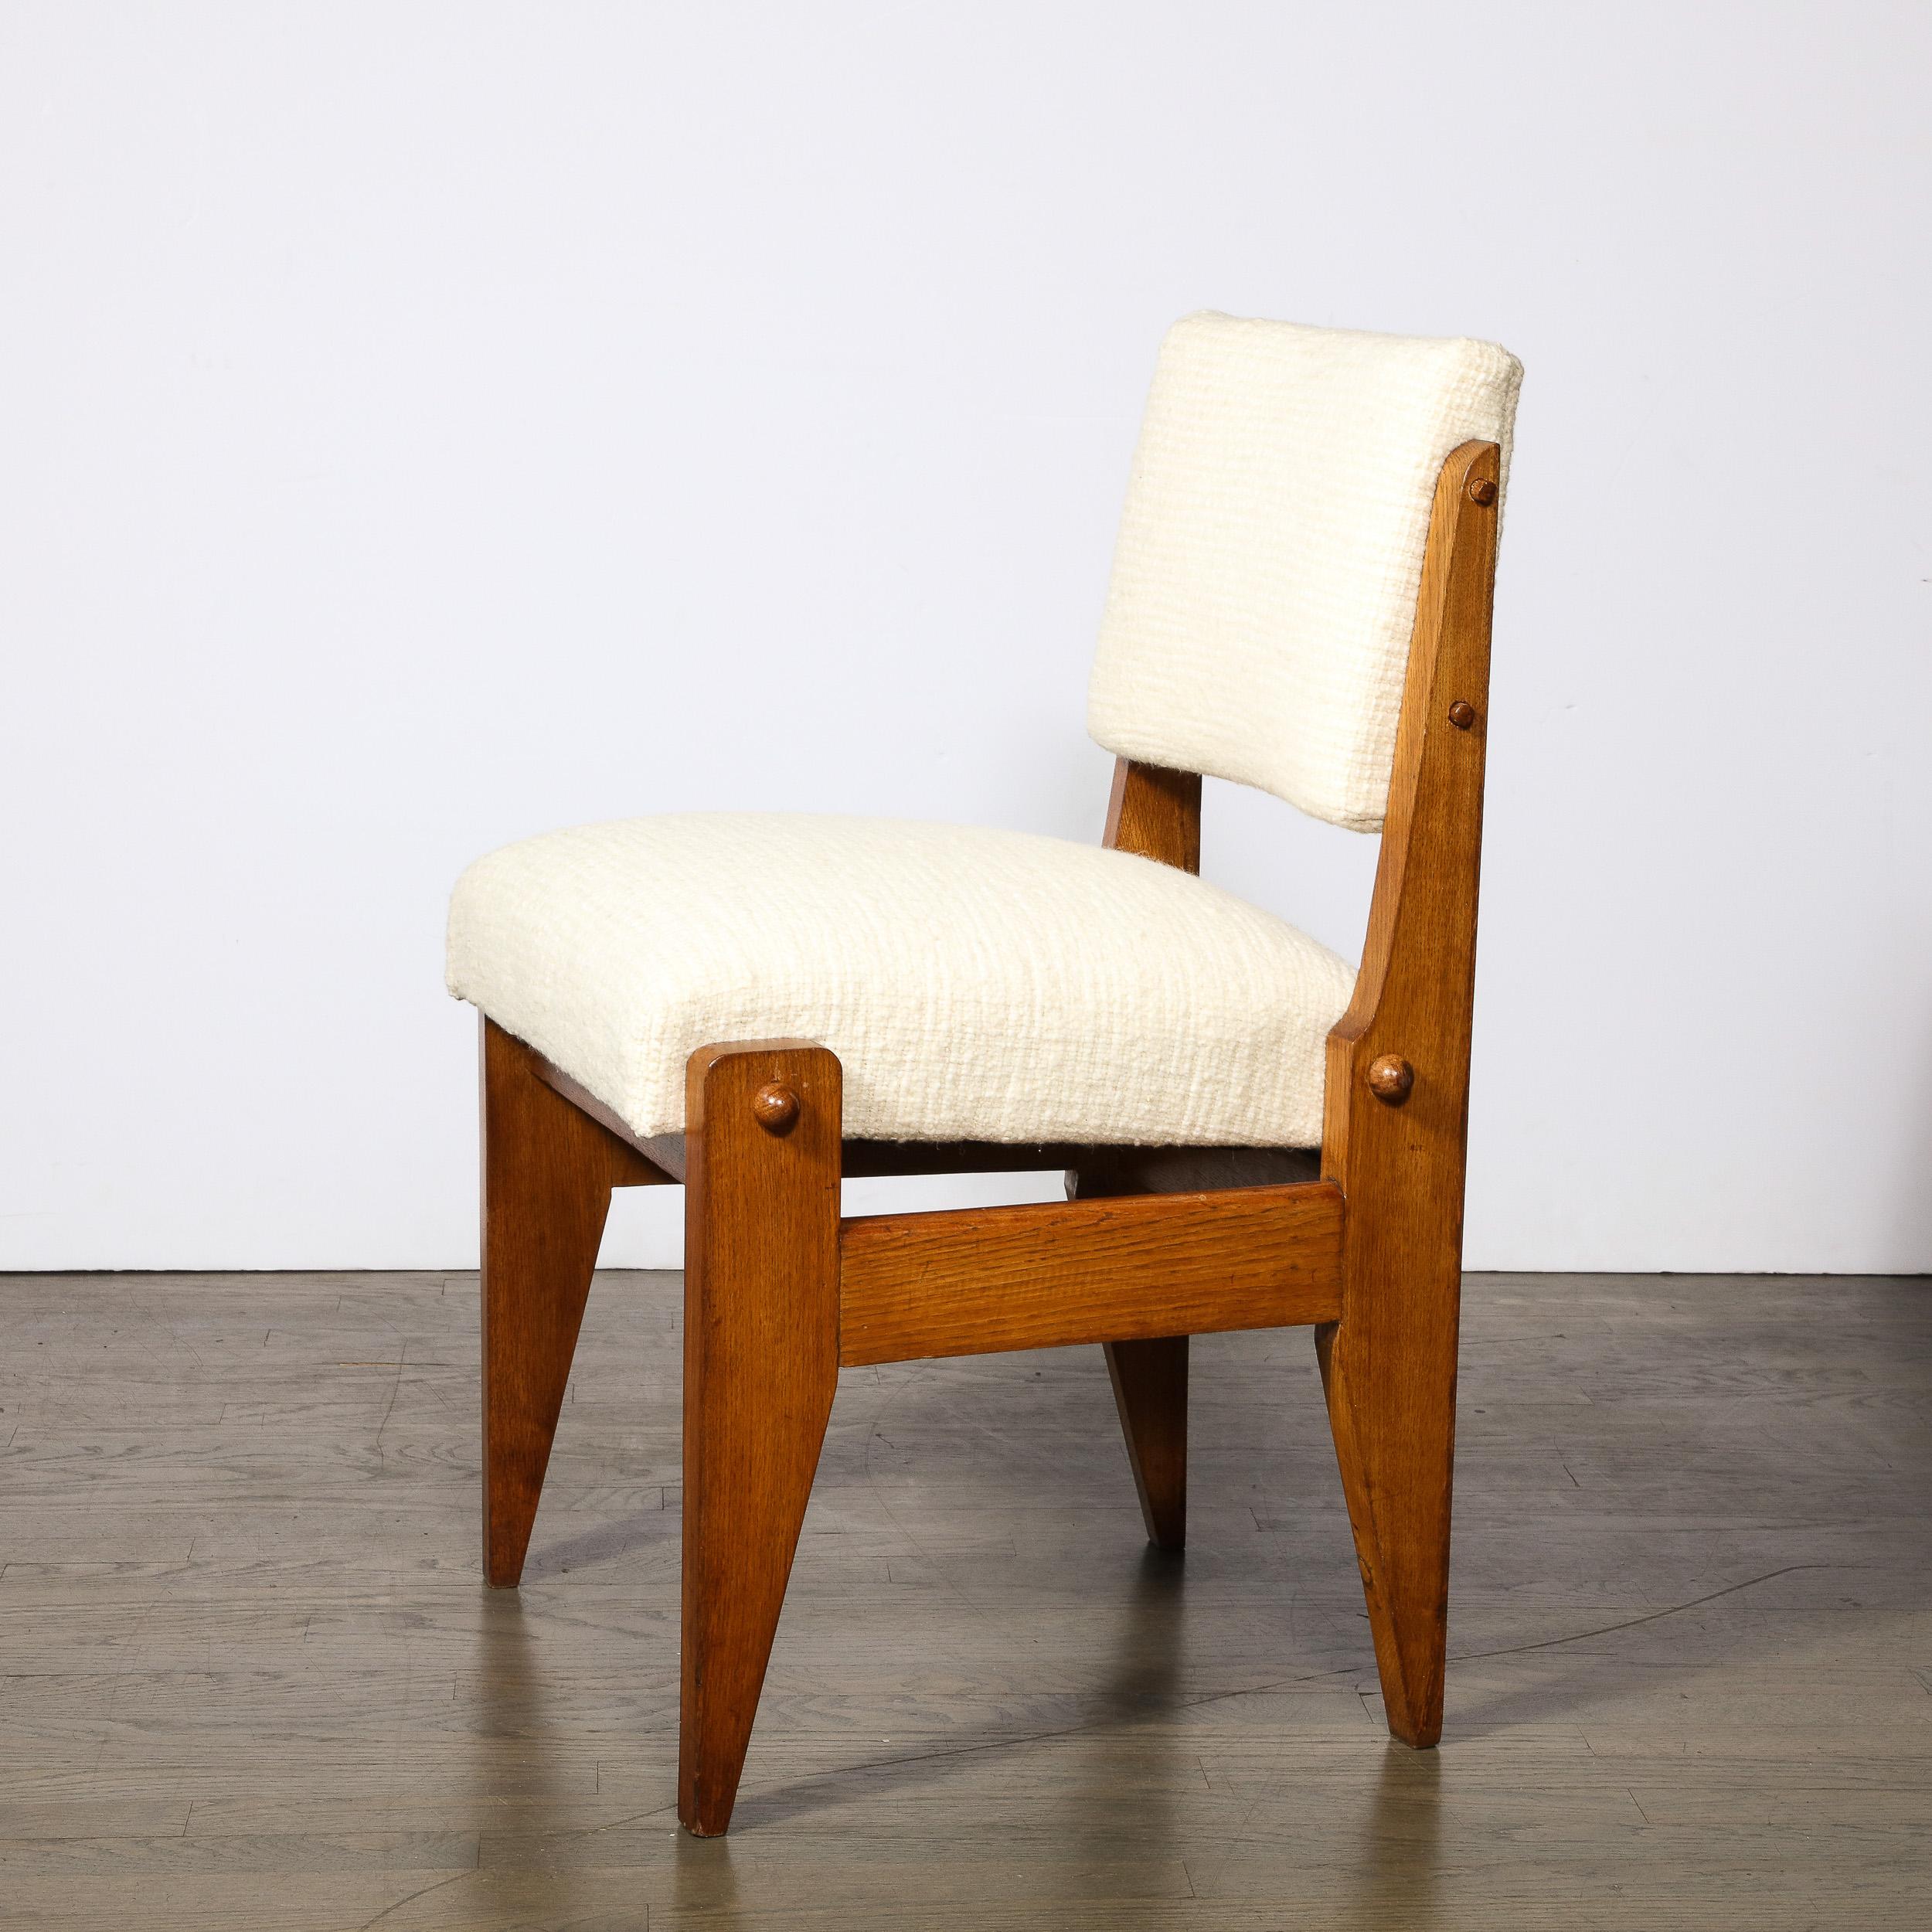 Mid-20th Century Mid-Century Modern Set of 4 Chairs Robert Guillerme & Jacques Chambron For Sale